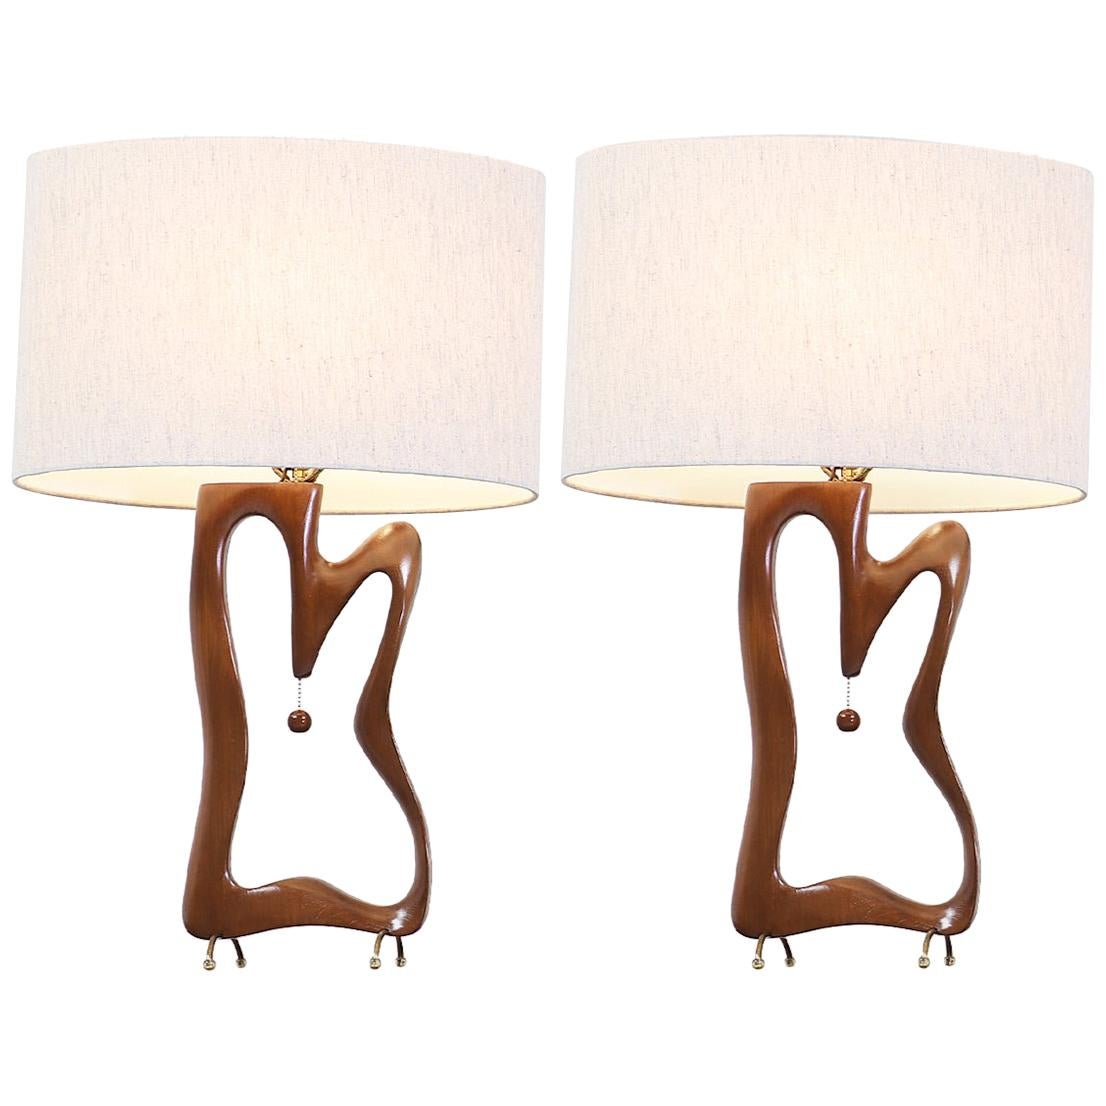 Mid-Century Modern Biomorphic Table Lamps